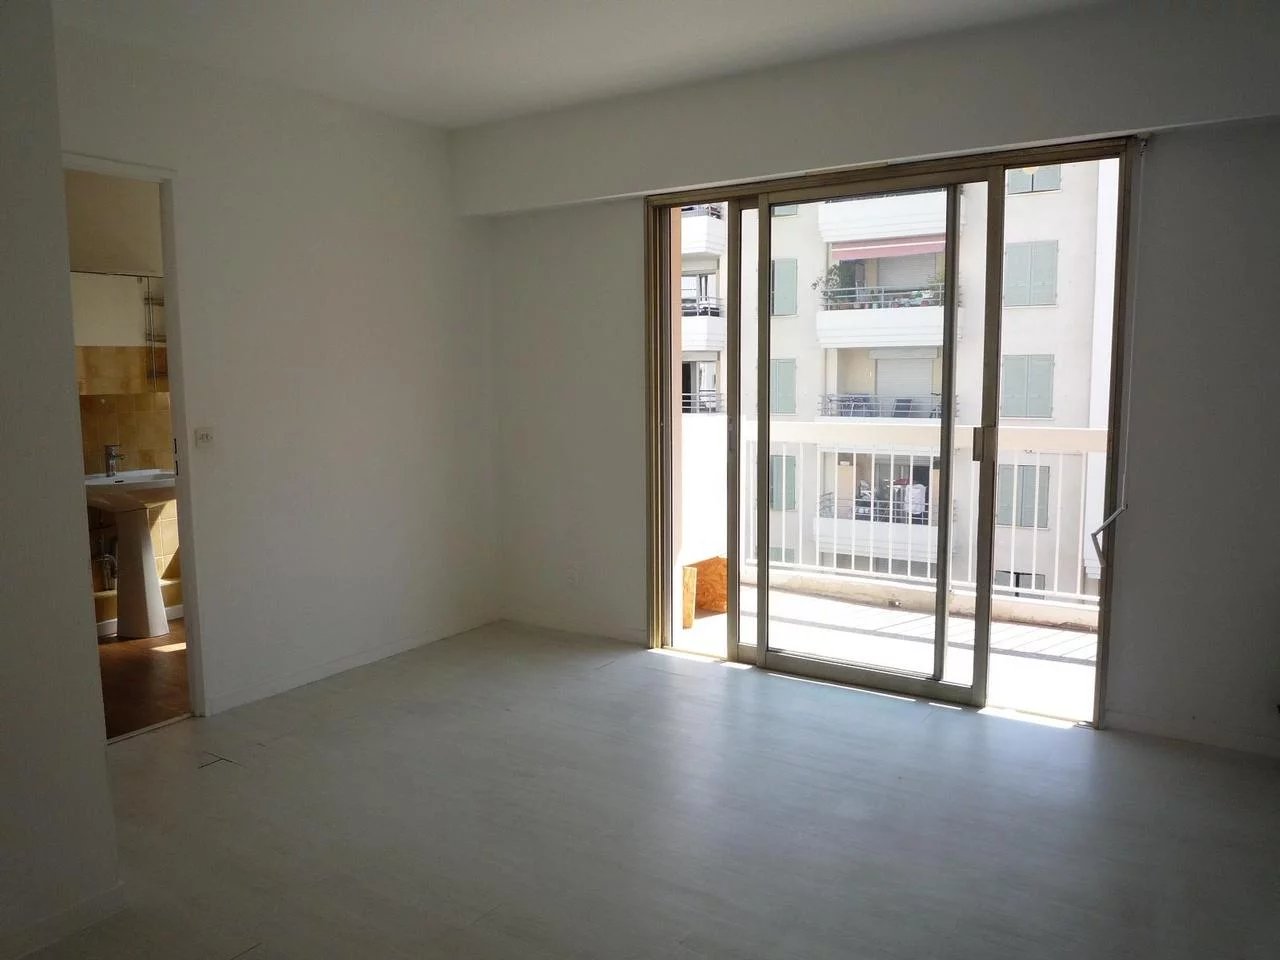 Appartement  2 Rooms 54.55m2  for sale   260 000 €